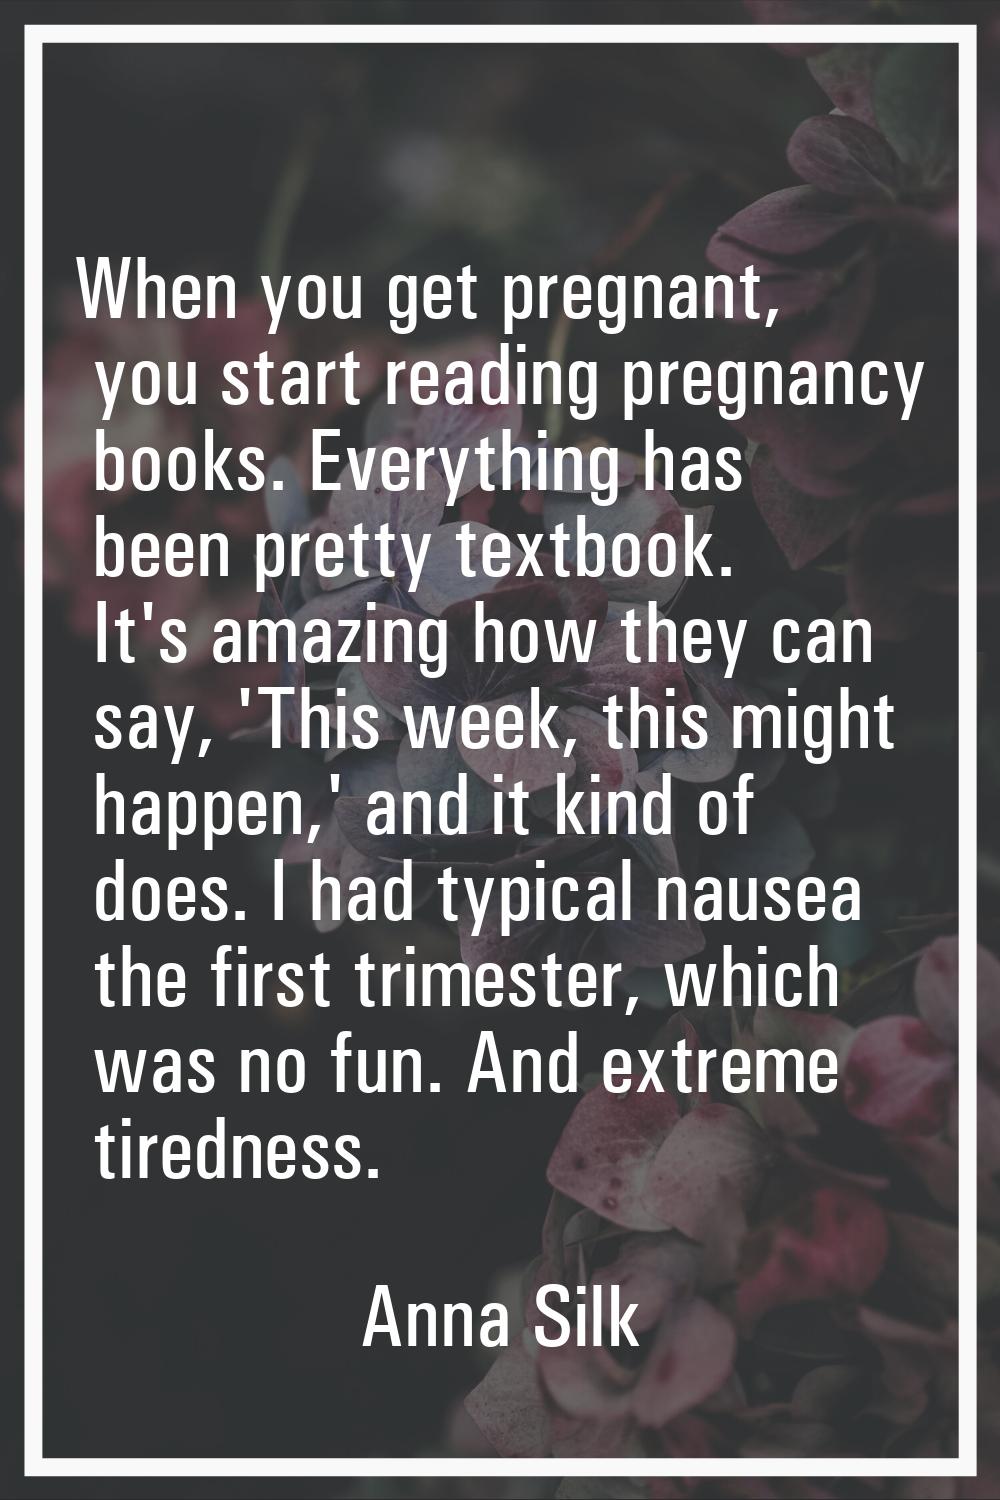 When you get pregnant, you start reading pregnancy books. Everything has been pretty textbook. It's